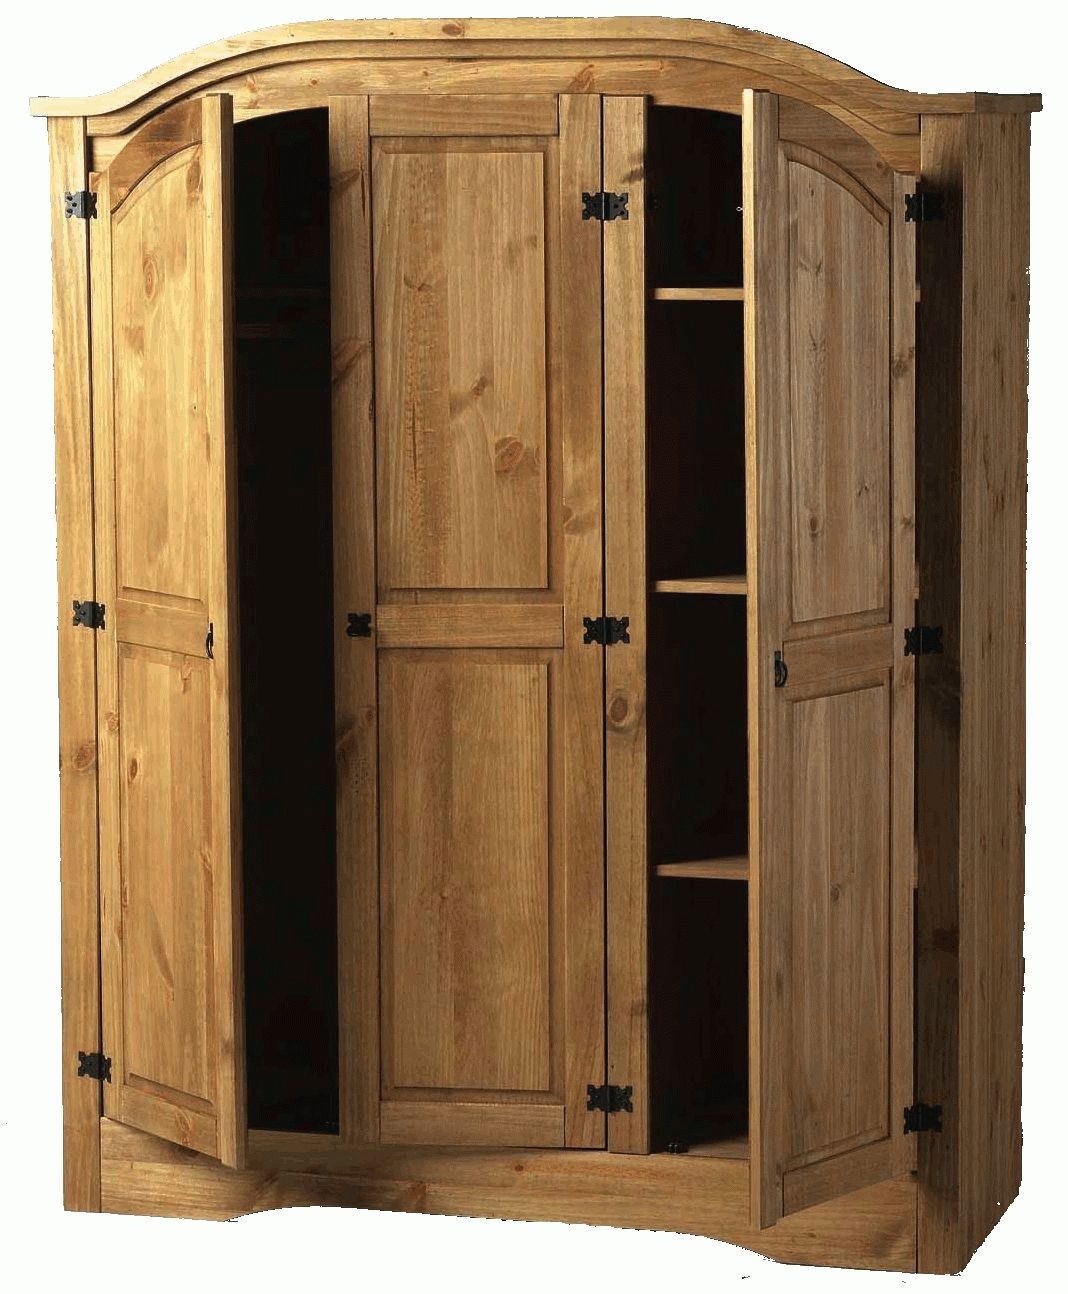 Mexican Pine Wardrobe Thee Door Curved Top Pertaining To Corona Wardrobes With 3 Doors (View 7 of 15)